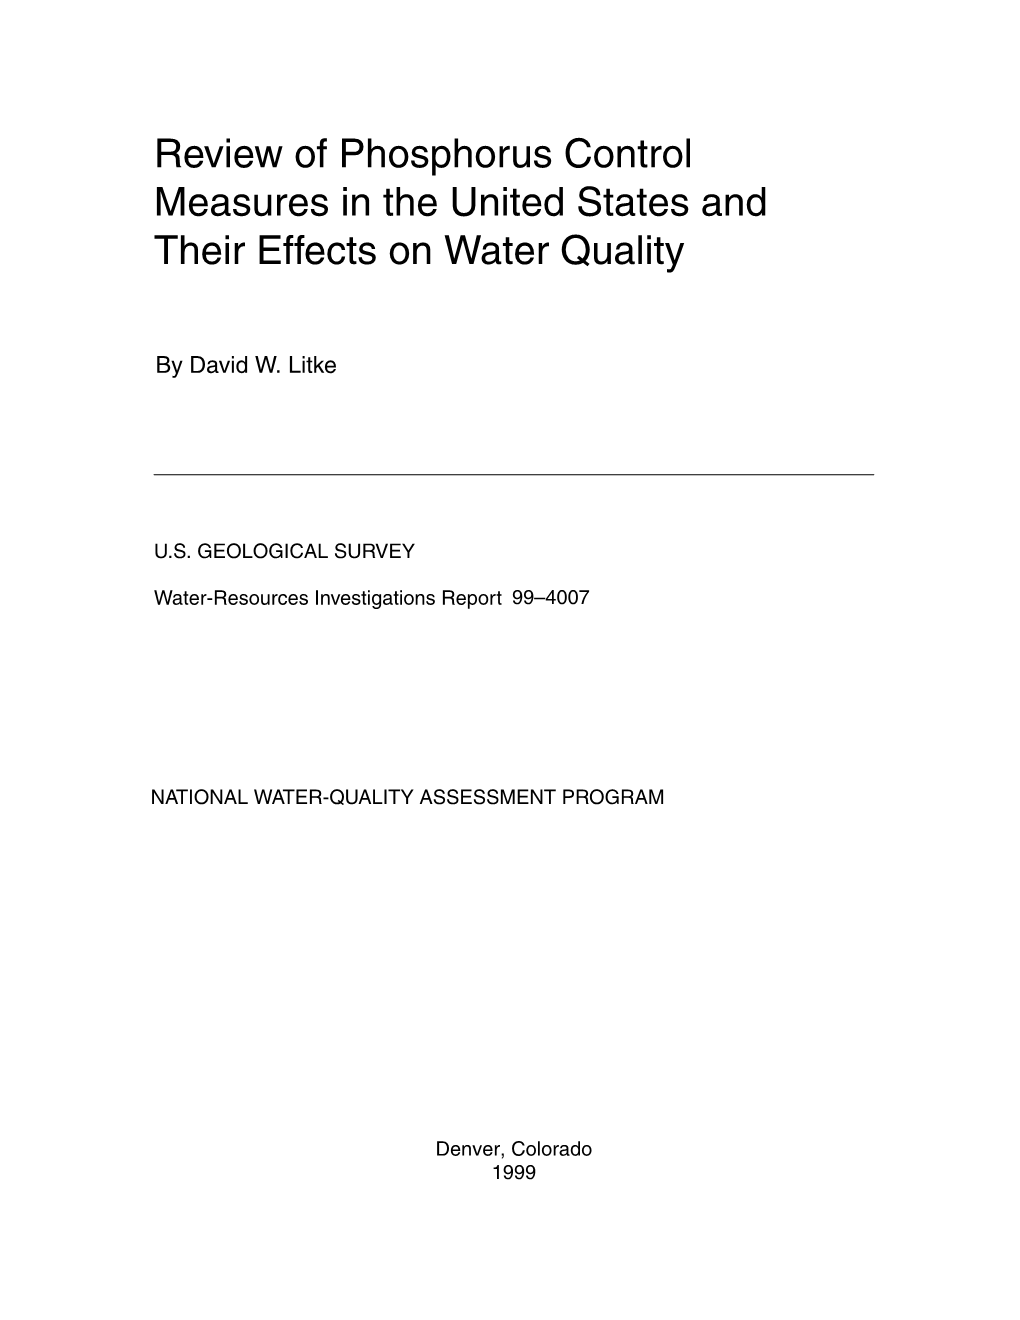 Review of Phosphorus Control Measures in the United States and Their Effects on Water Quality